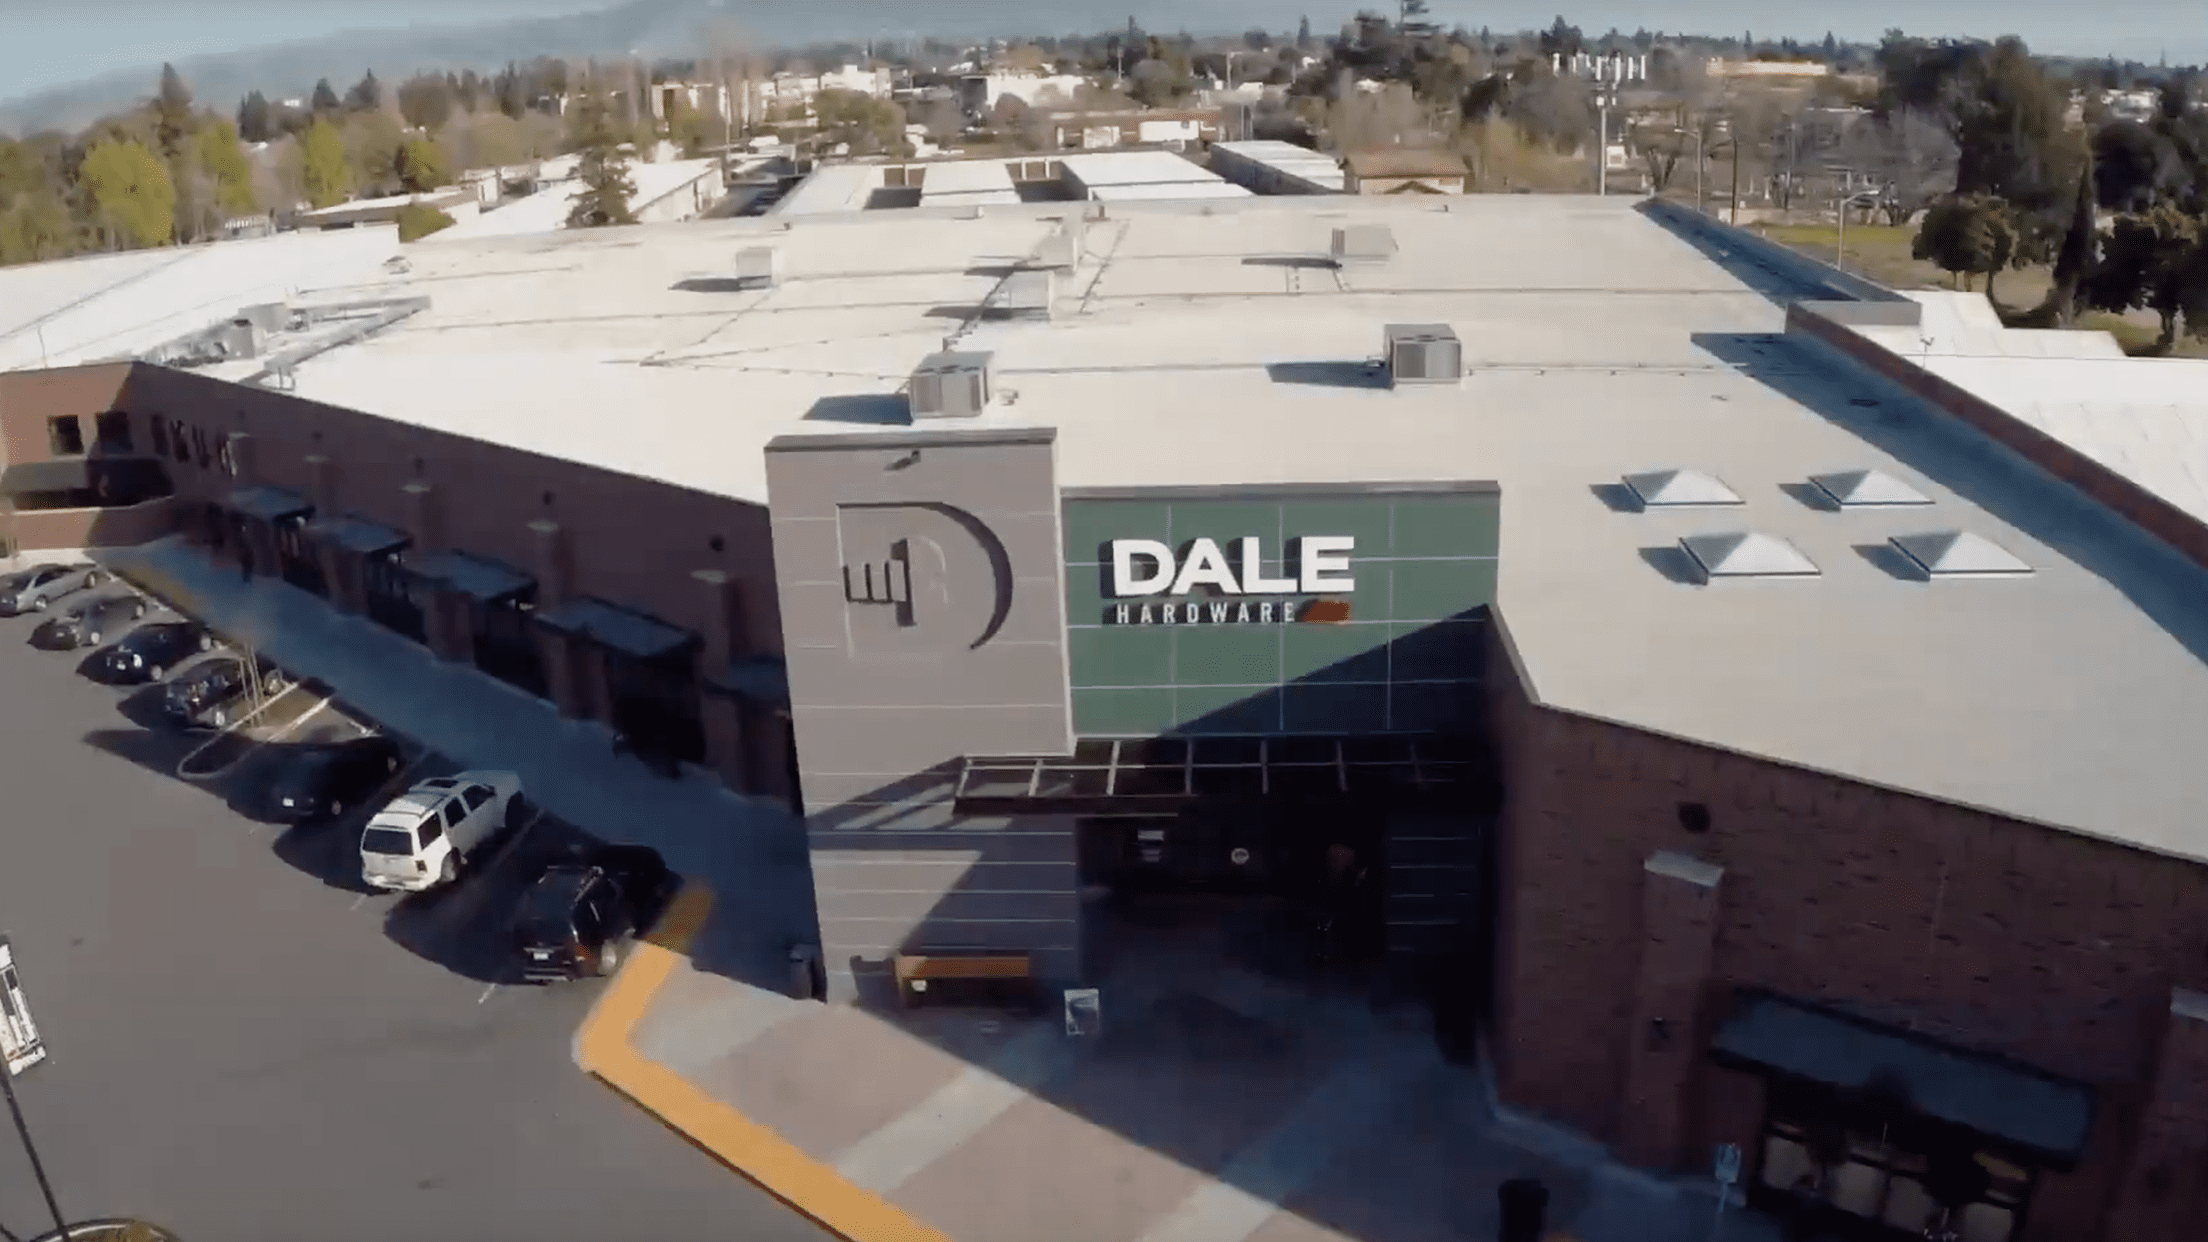 Dale Hardware - Commercial Architecture